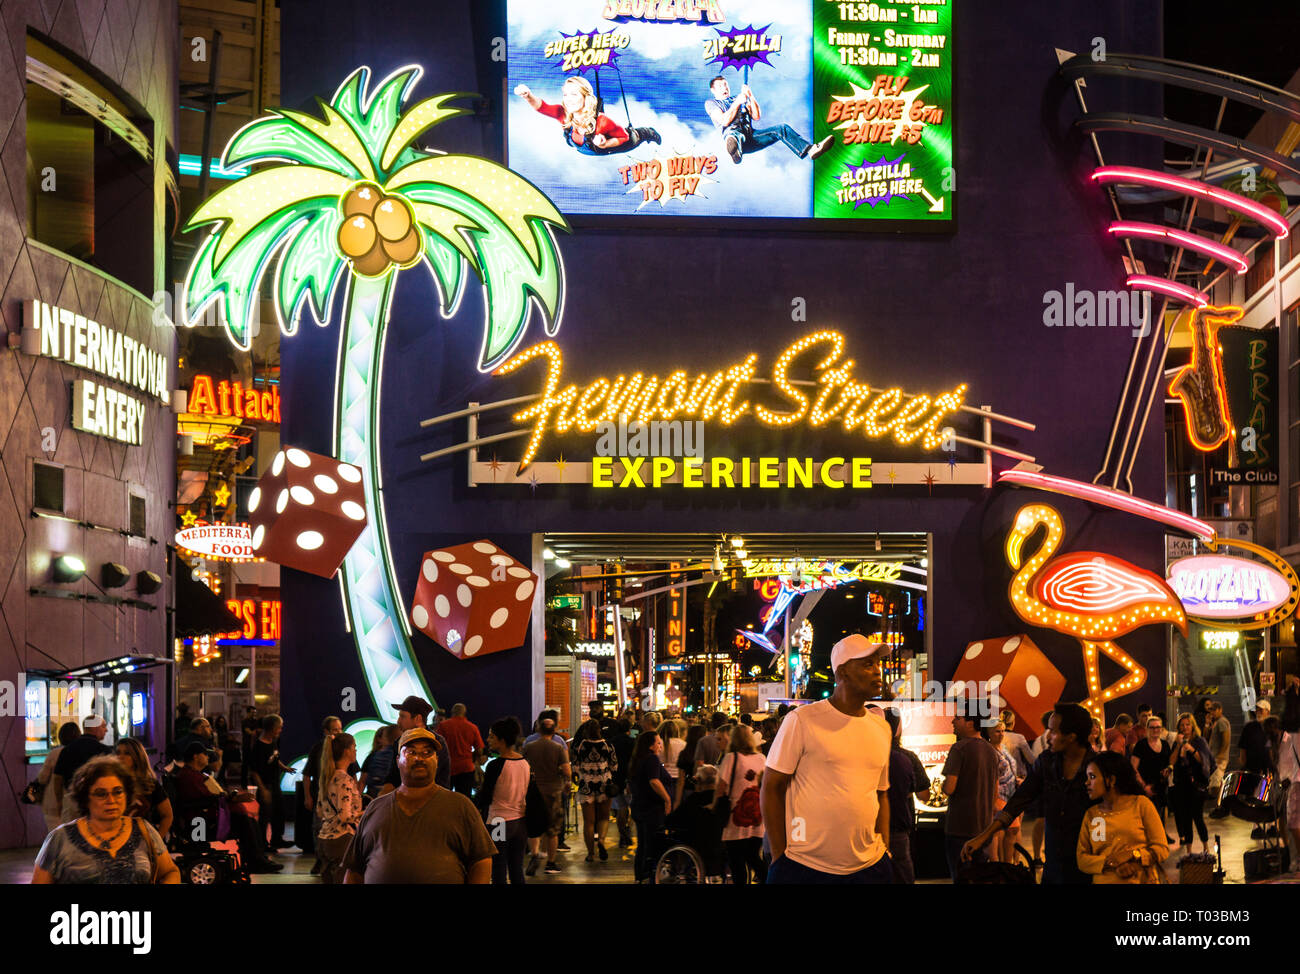 Neon lights shining brightly in Old Las Vegas or Downtown Las Vegas (one and the same) Stock Photo